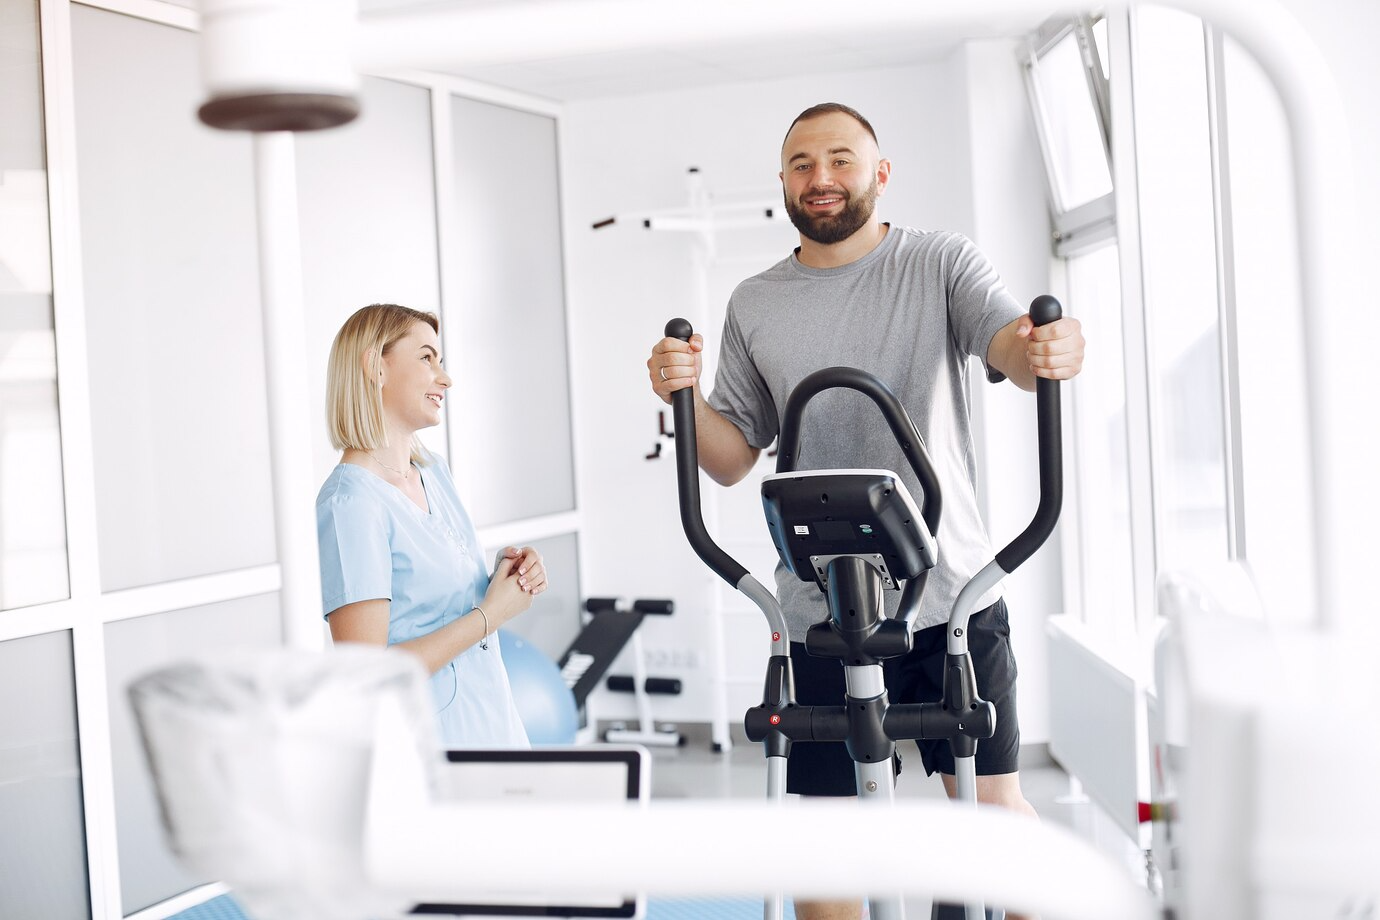 Therapy and Rehabilitation patient doing exercise spin bike gym with therapist 1157 38176